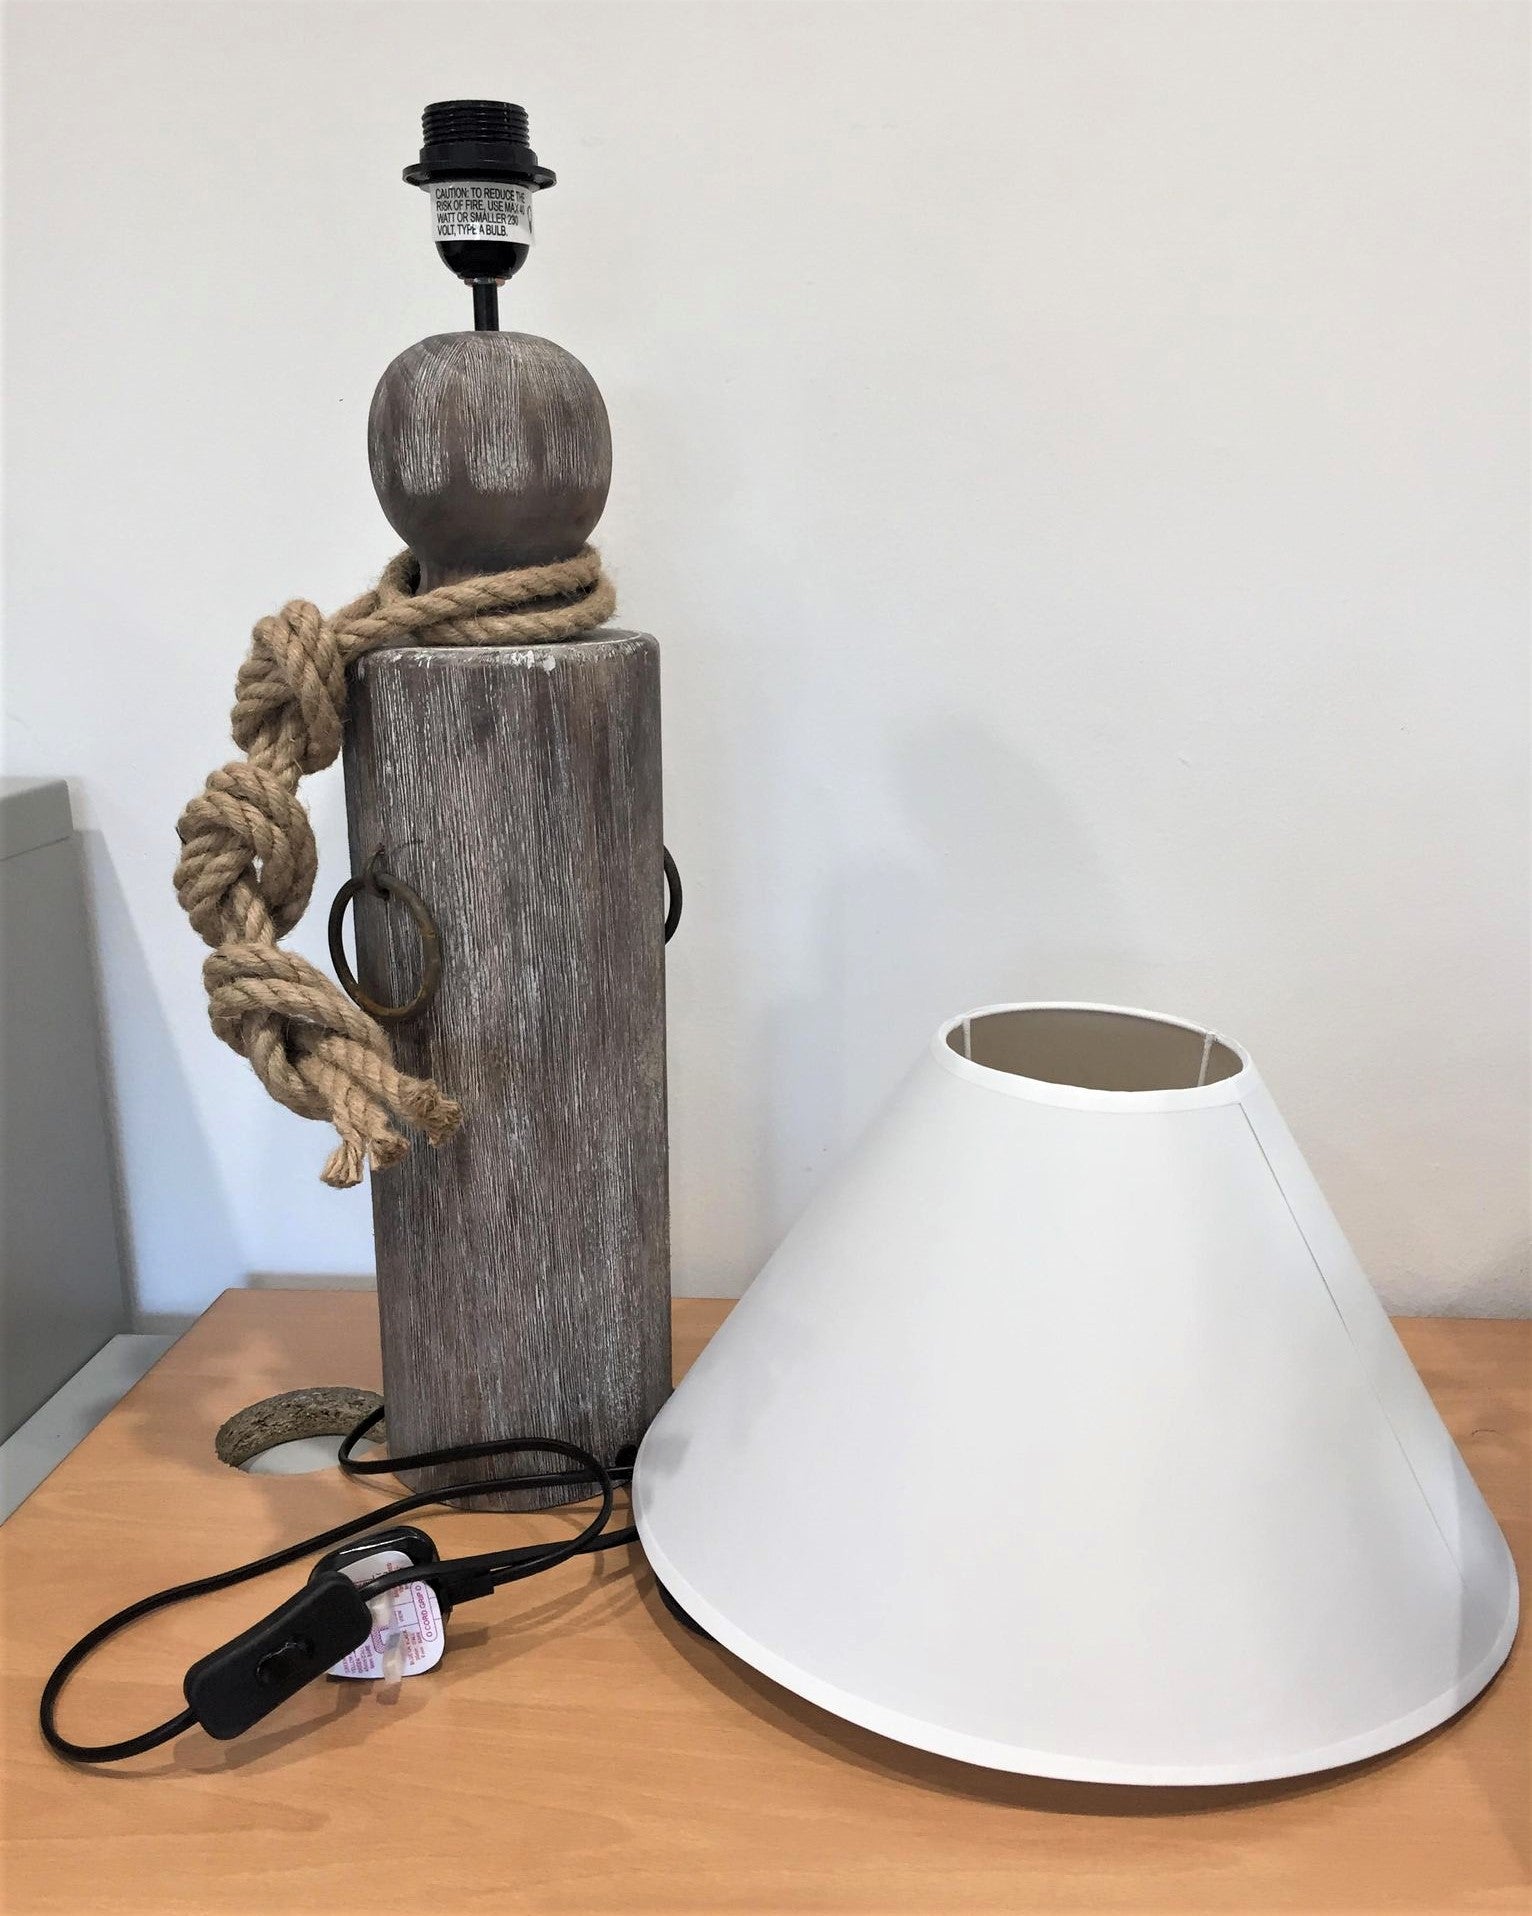 Post With Fisherman's Rope Lamp